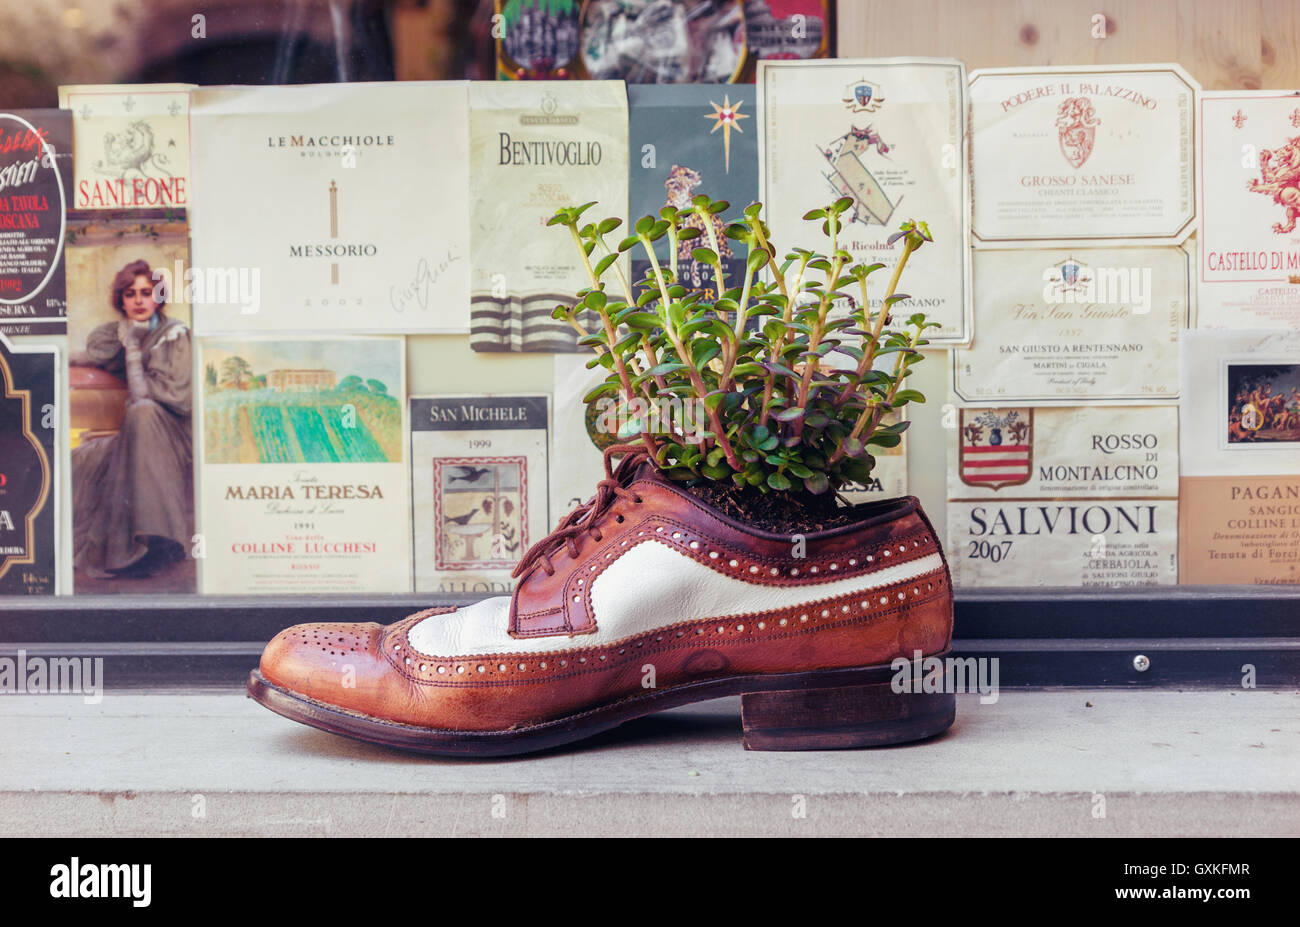 Old leather shoe as decorative flower pot in a background of vintage wine labels in Florence, Italy Stock Photo